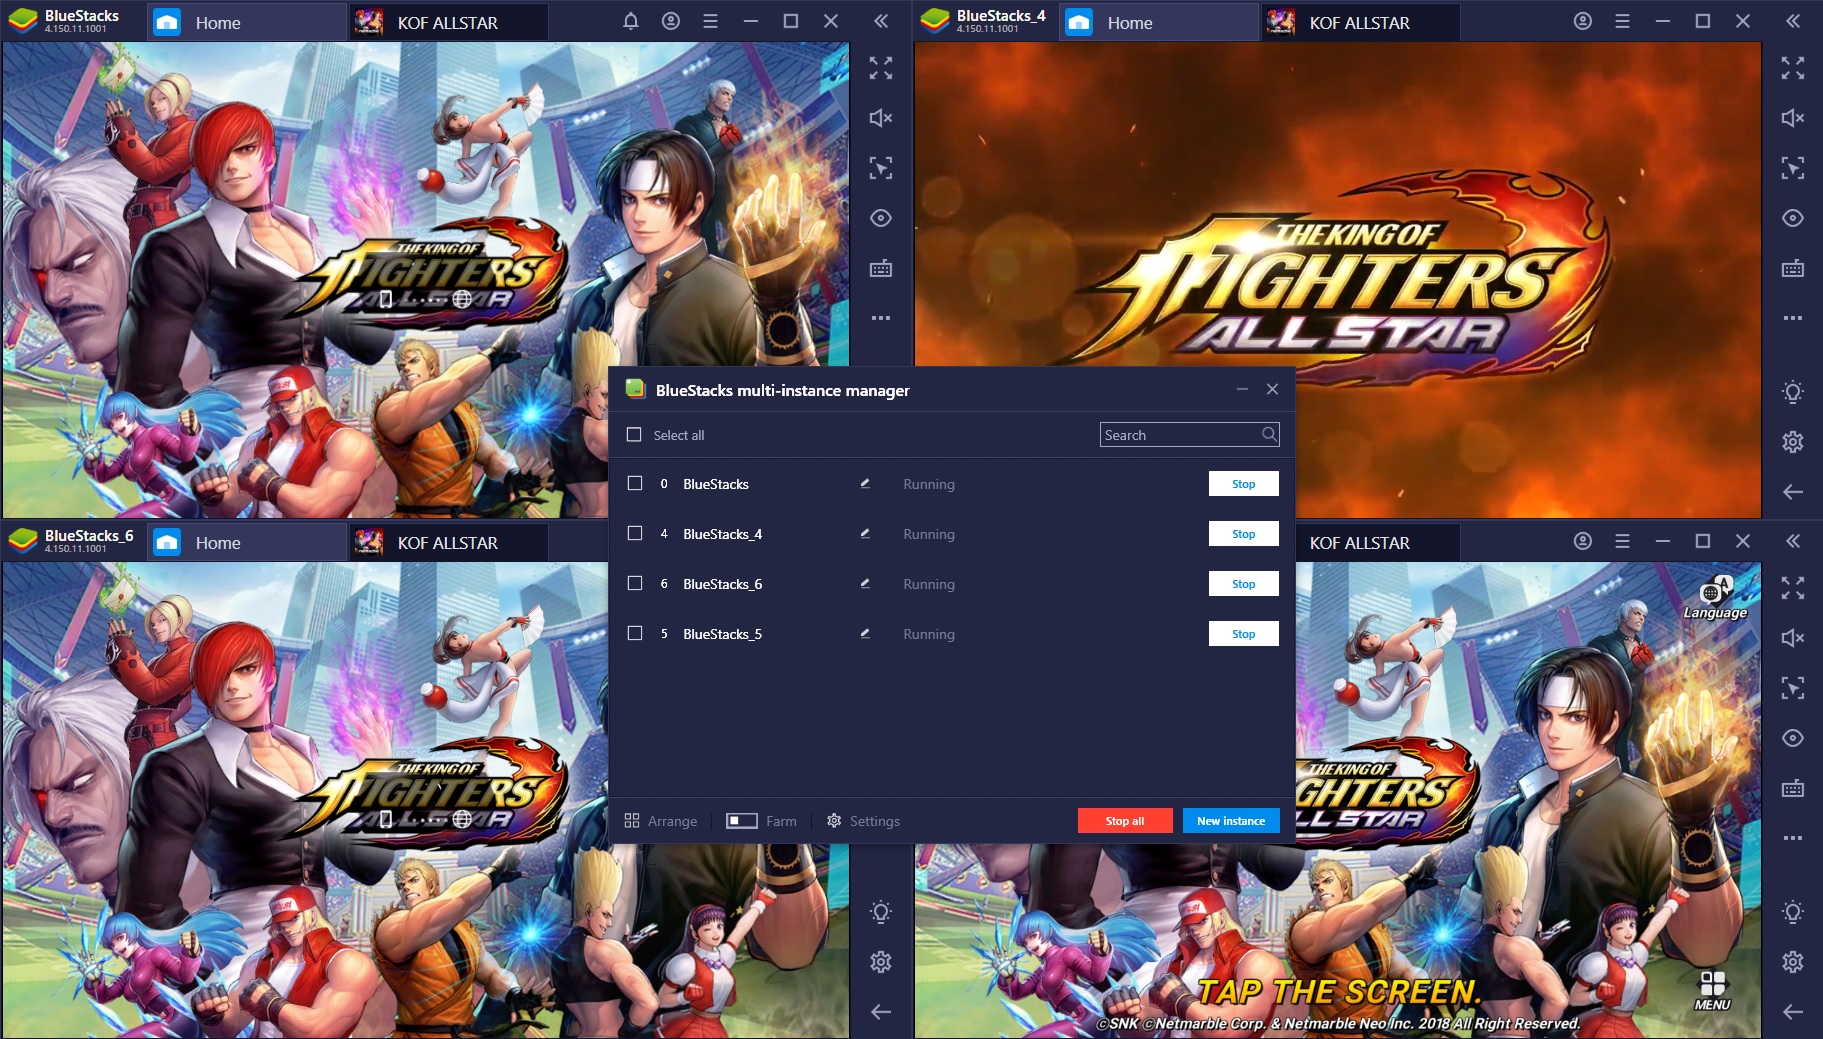 BlueStacks Multi-Instance Manager: Farm in Multiple Windows or Play Different Games Simultaneously